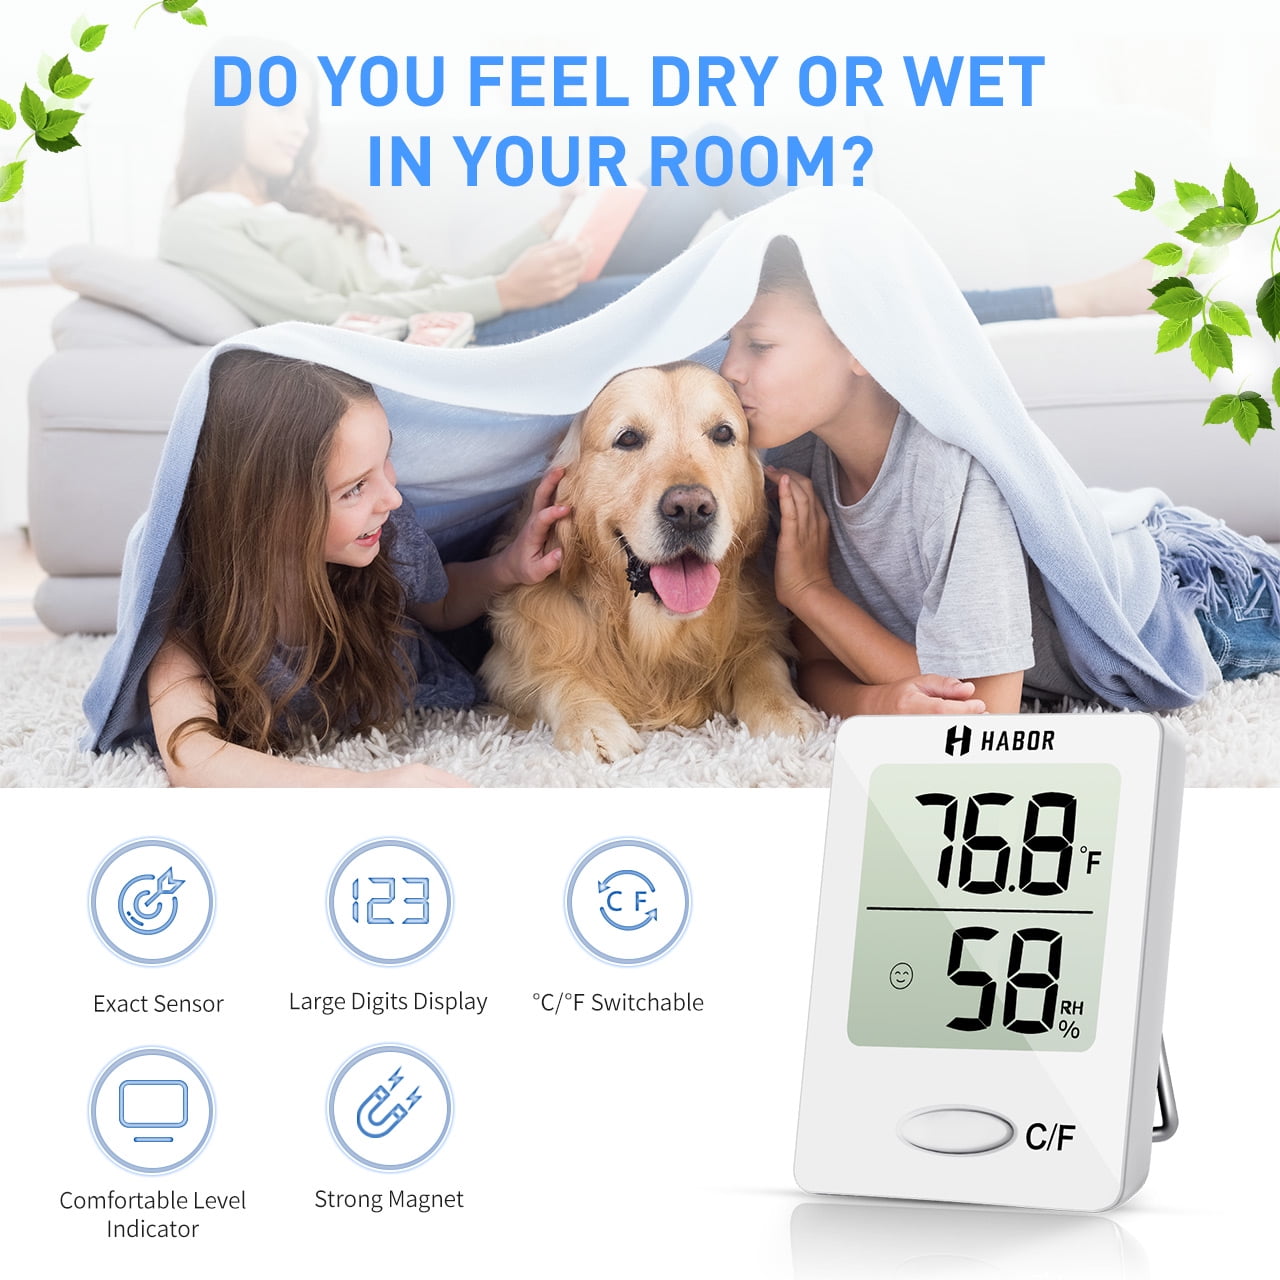 AyayaBoss Room Thermometer for Home, Indoor Thermometer Hygrometer,  Humidity Gauge, Temperature and Humidity Monitor, Digital Sensor Humidity  Meter